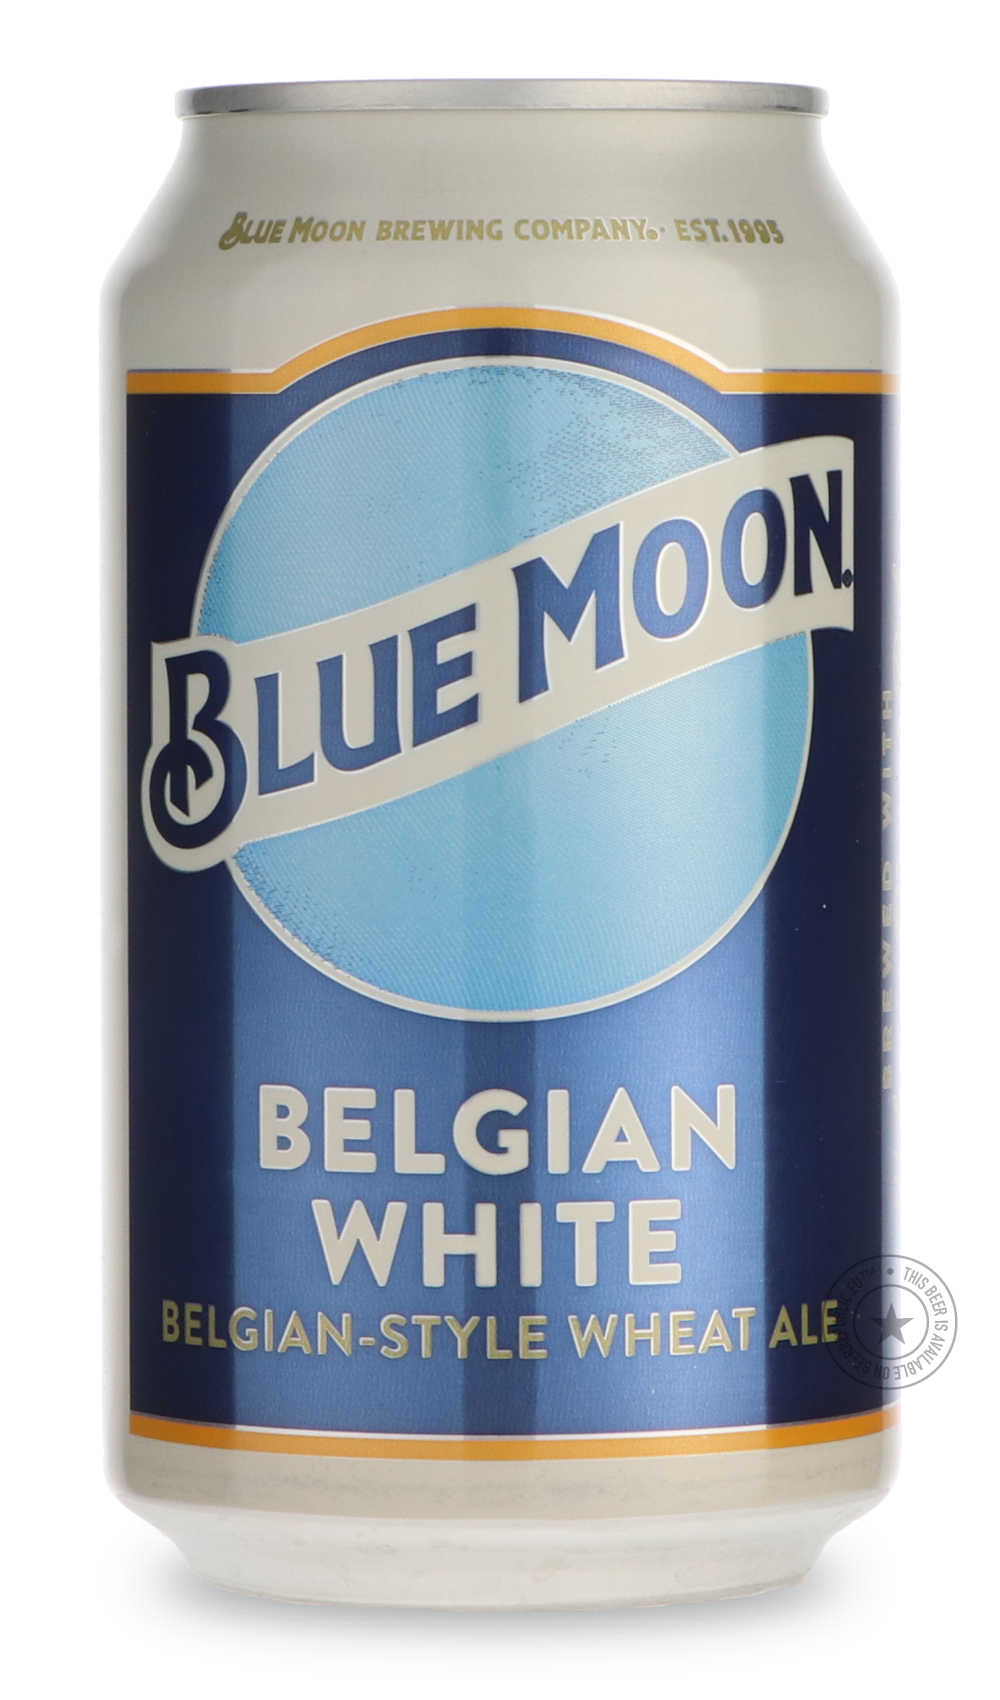 -Blue Moon- Belgian White-Pale- Only @ Beer Republic - The best online beer store for American & Canadian craft beer - Buy beer online from the USA and Canada - Bier online kopen - Amerikaans bier kopen - Craft beer store - Craft beer kopen - Amerikanisch bier kaufen - Bier online kaufen - Acheter biere online - IPA - Stout - Porter - New England IPA - Hazy IPA - Imperial Stout - Barrel Aged - Barrel Aged Imperial Stout - Brown - Dark beer - Blond - Blonde - Pilsner - Lager - Wheat - Weizen - Amber - Barley